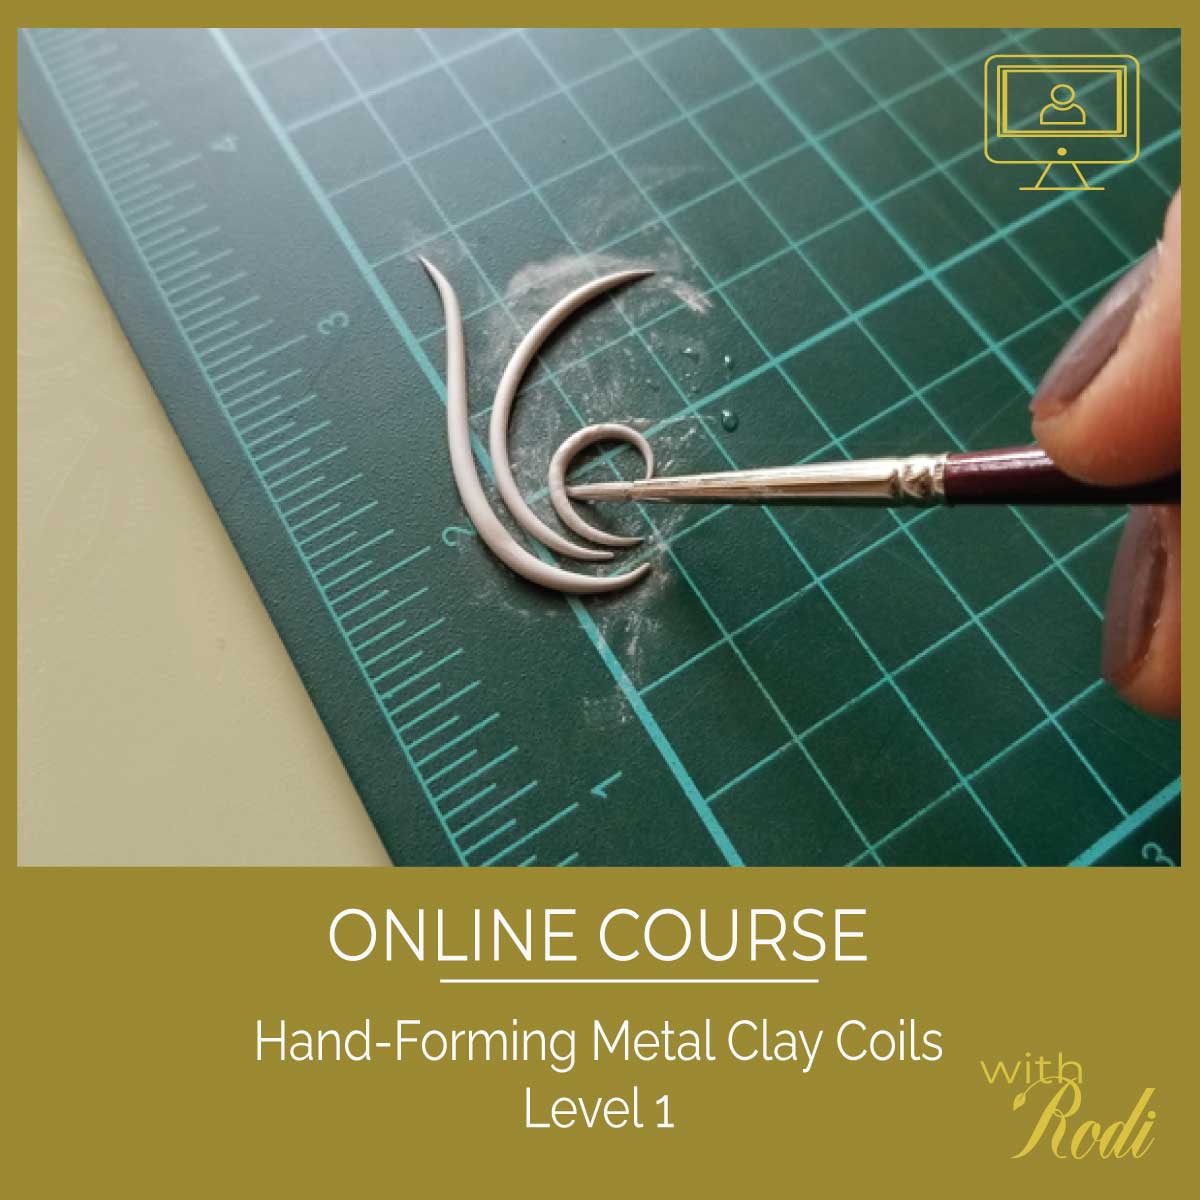 Metal Clay Coils - Level 1 Online Course